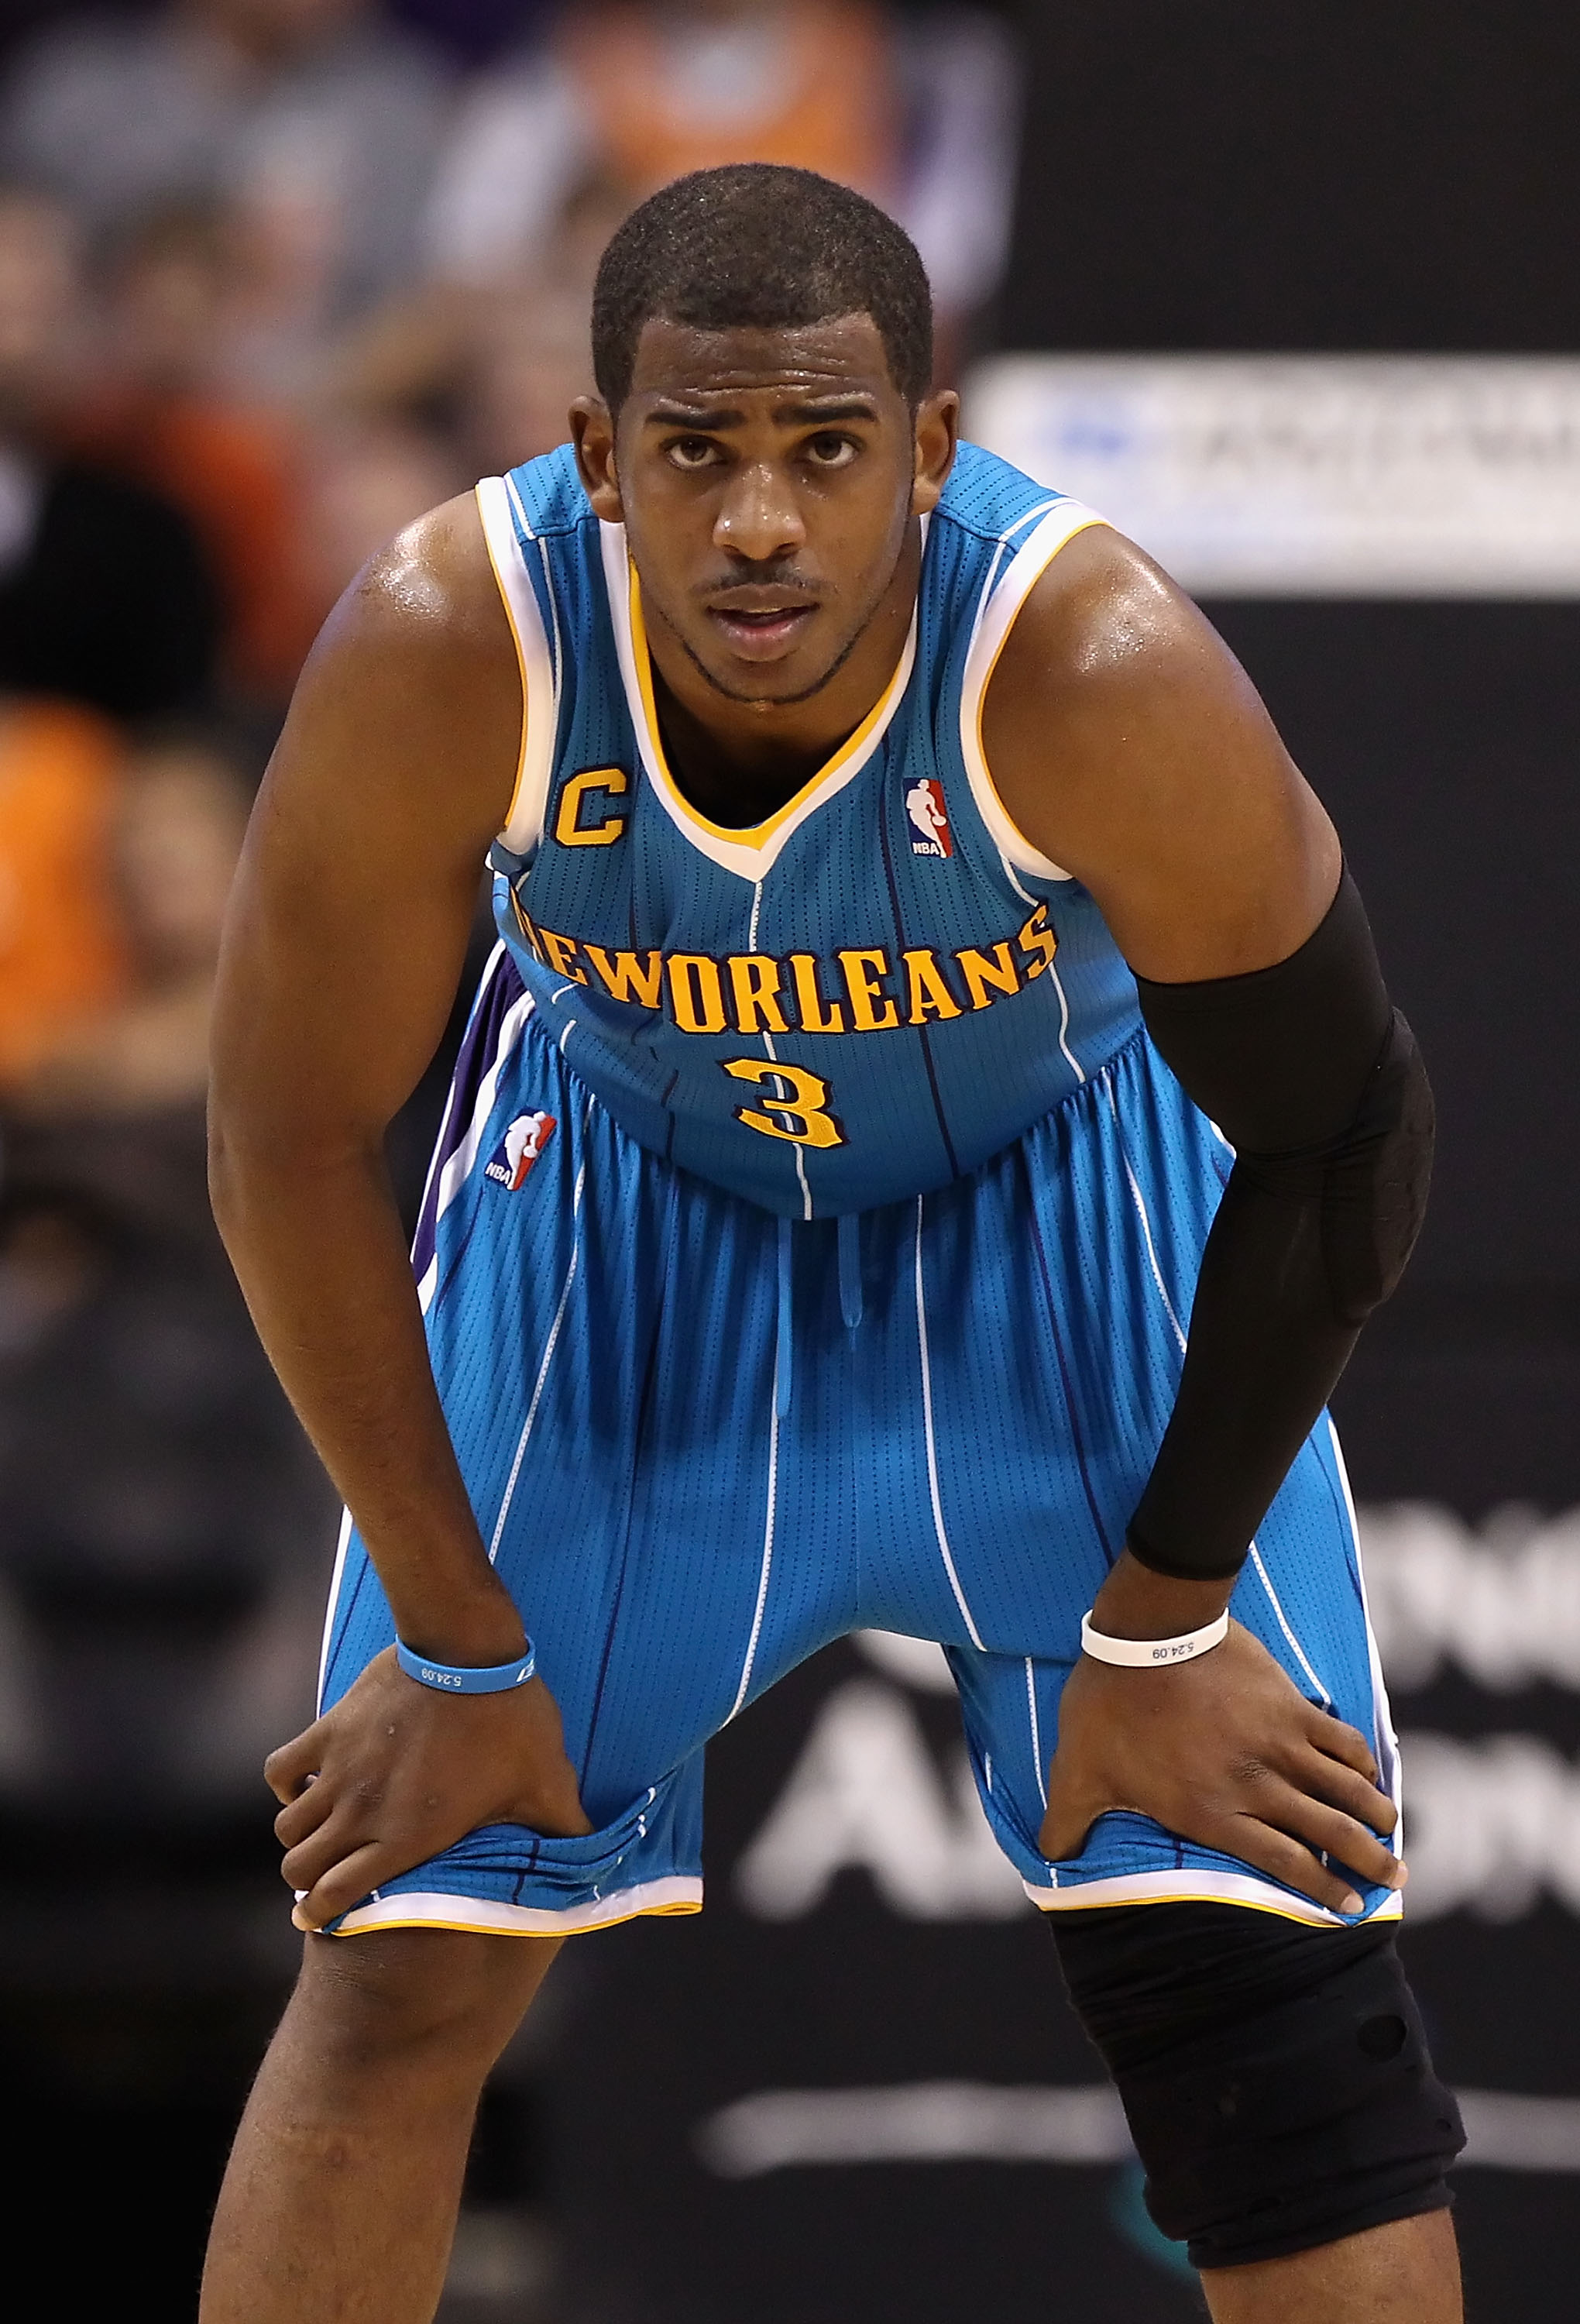 PHOENIX, AZ - JANUARY 30:  Chris Paul #3 of the New Orleans Hornets during the NBA game against  the Phoenix Suns at US Airways Center on January 30, 2011 in Phoenix, Arizona.  The Suns defeated the Hornets 104-102. NOTE TO USER: User expressly acknowledg